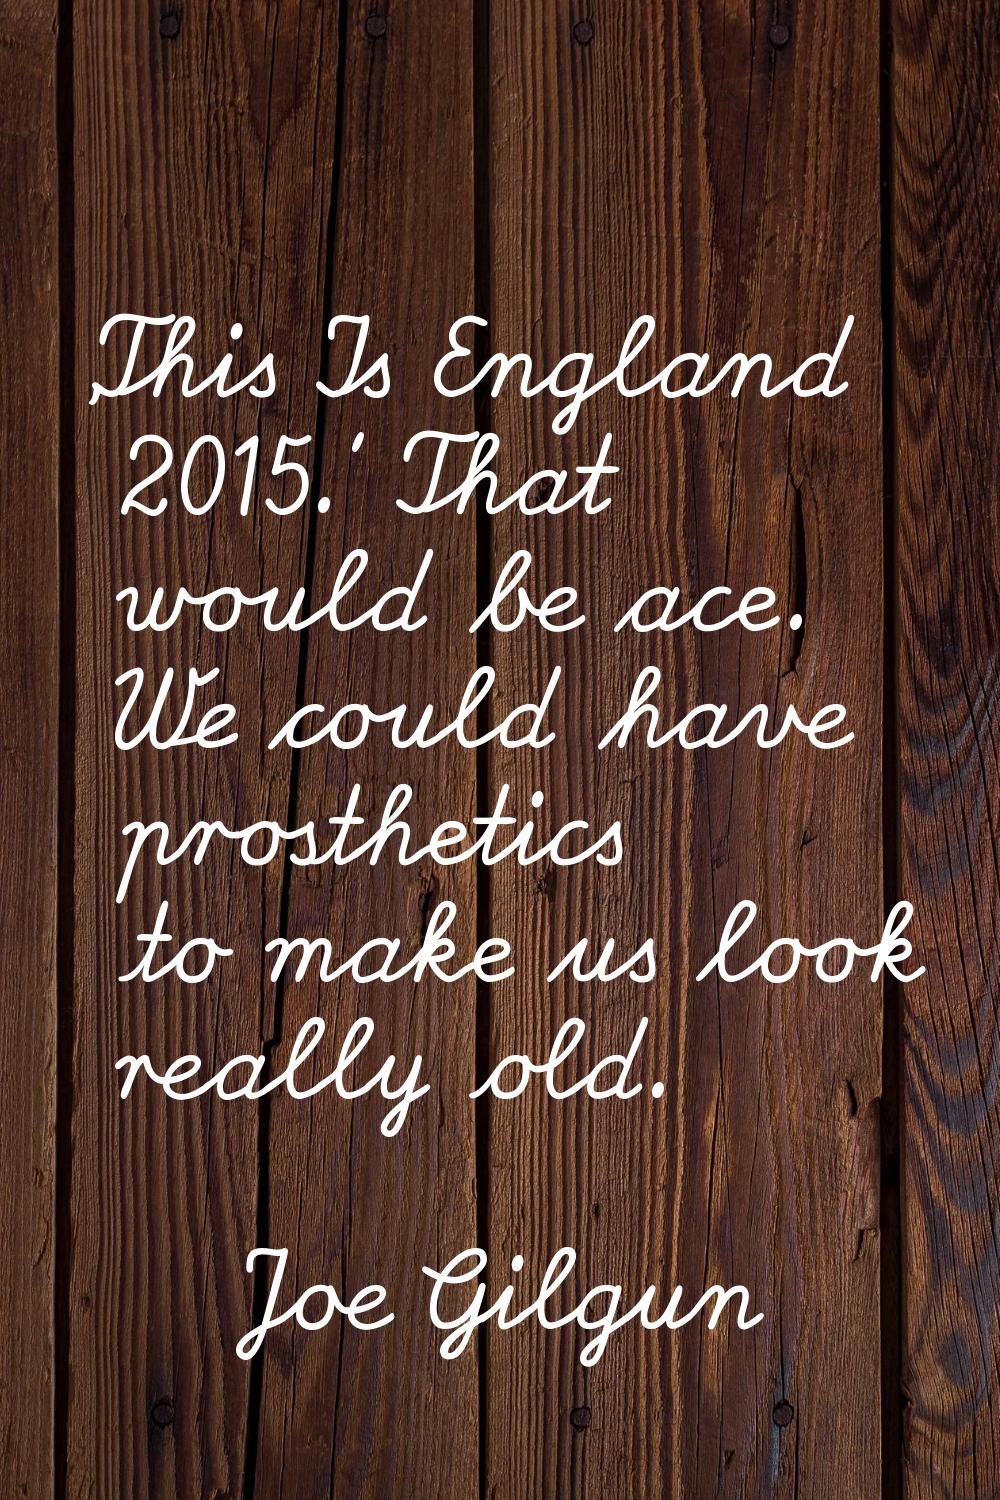 'This Is England 2015.' That would be ace. We could have prosthetics to make us look really old.